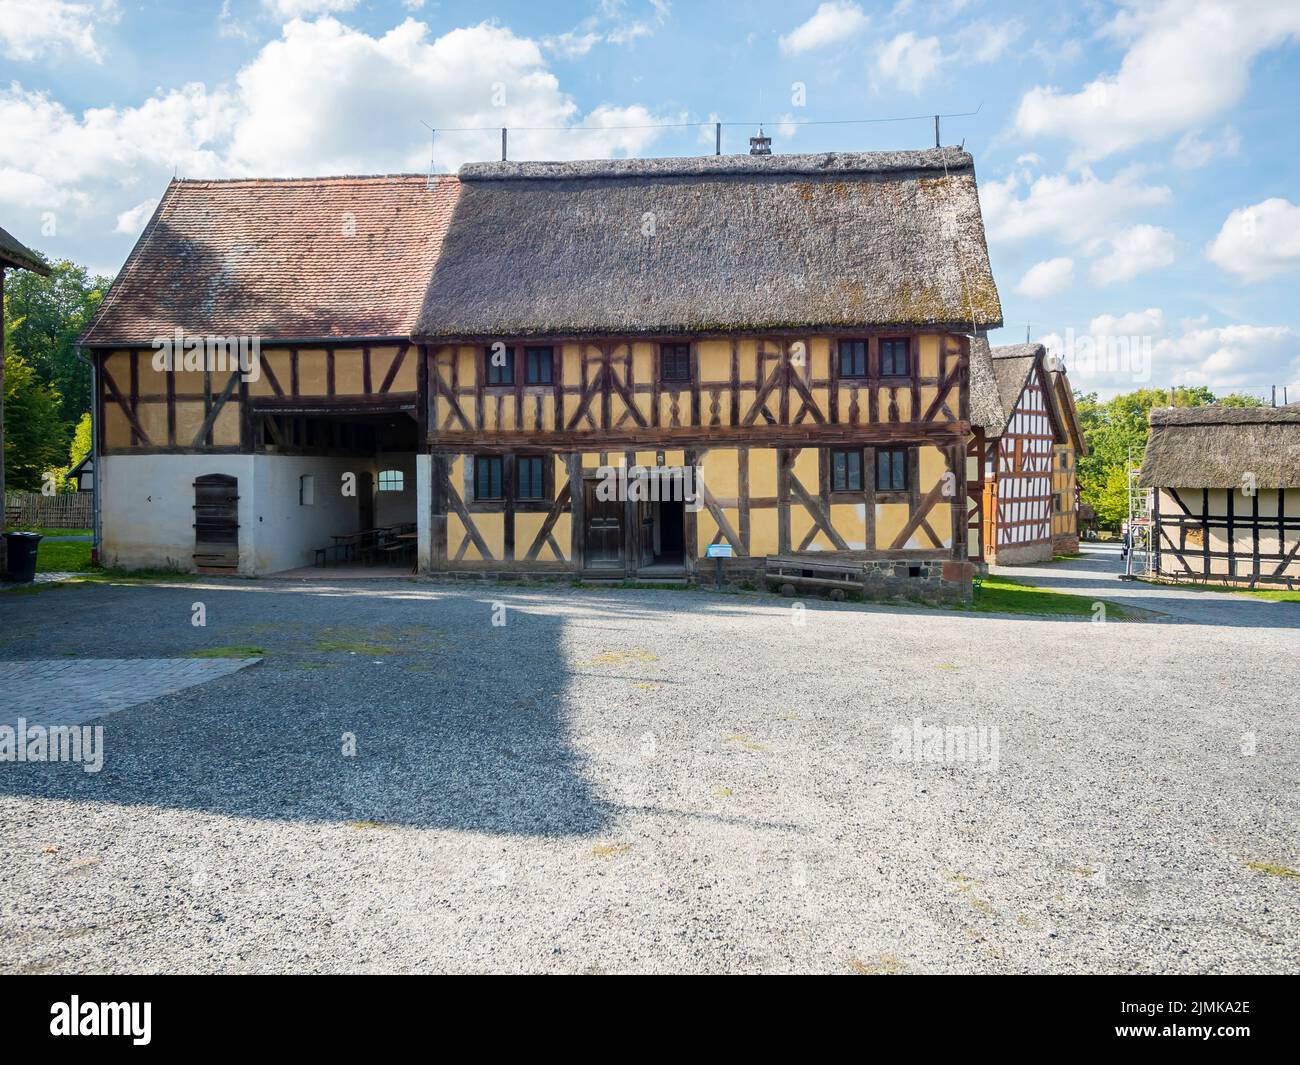 Historical half-timbered house in the open-air museum Hessenpark Stock Photo